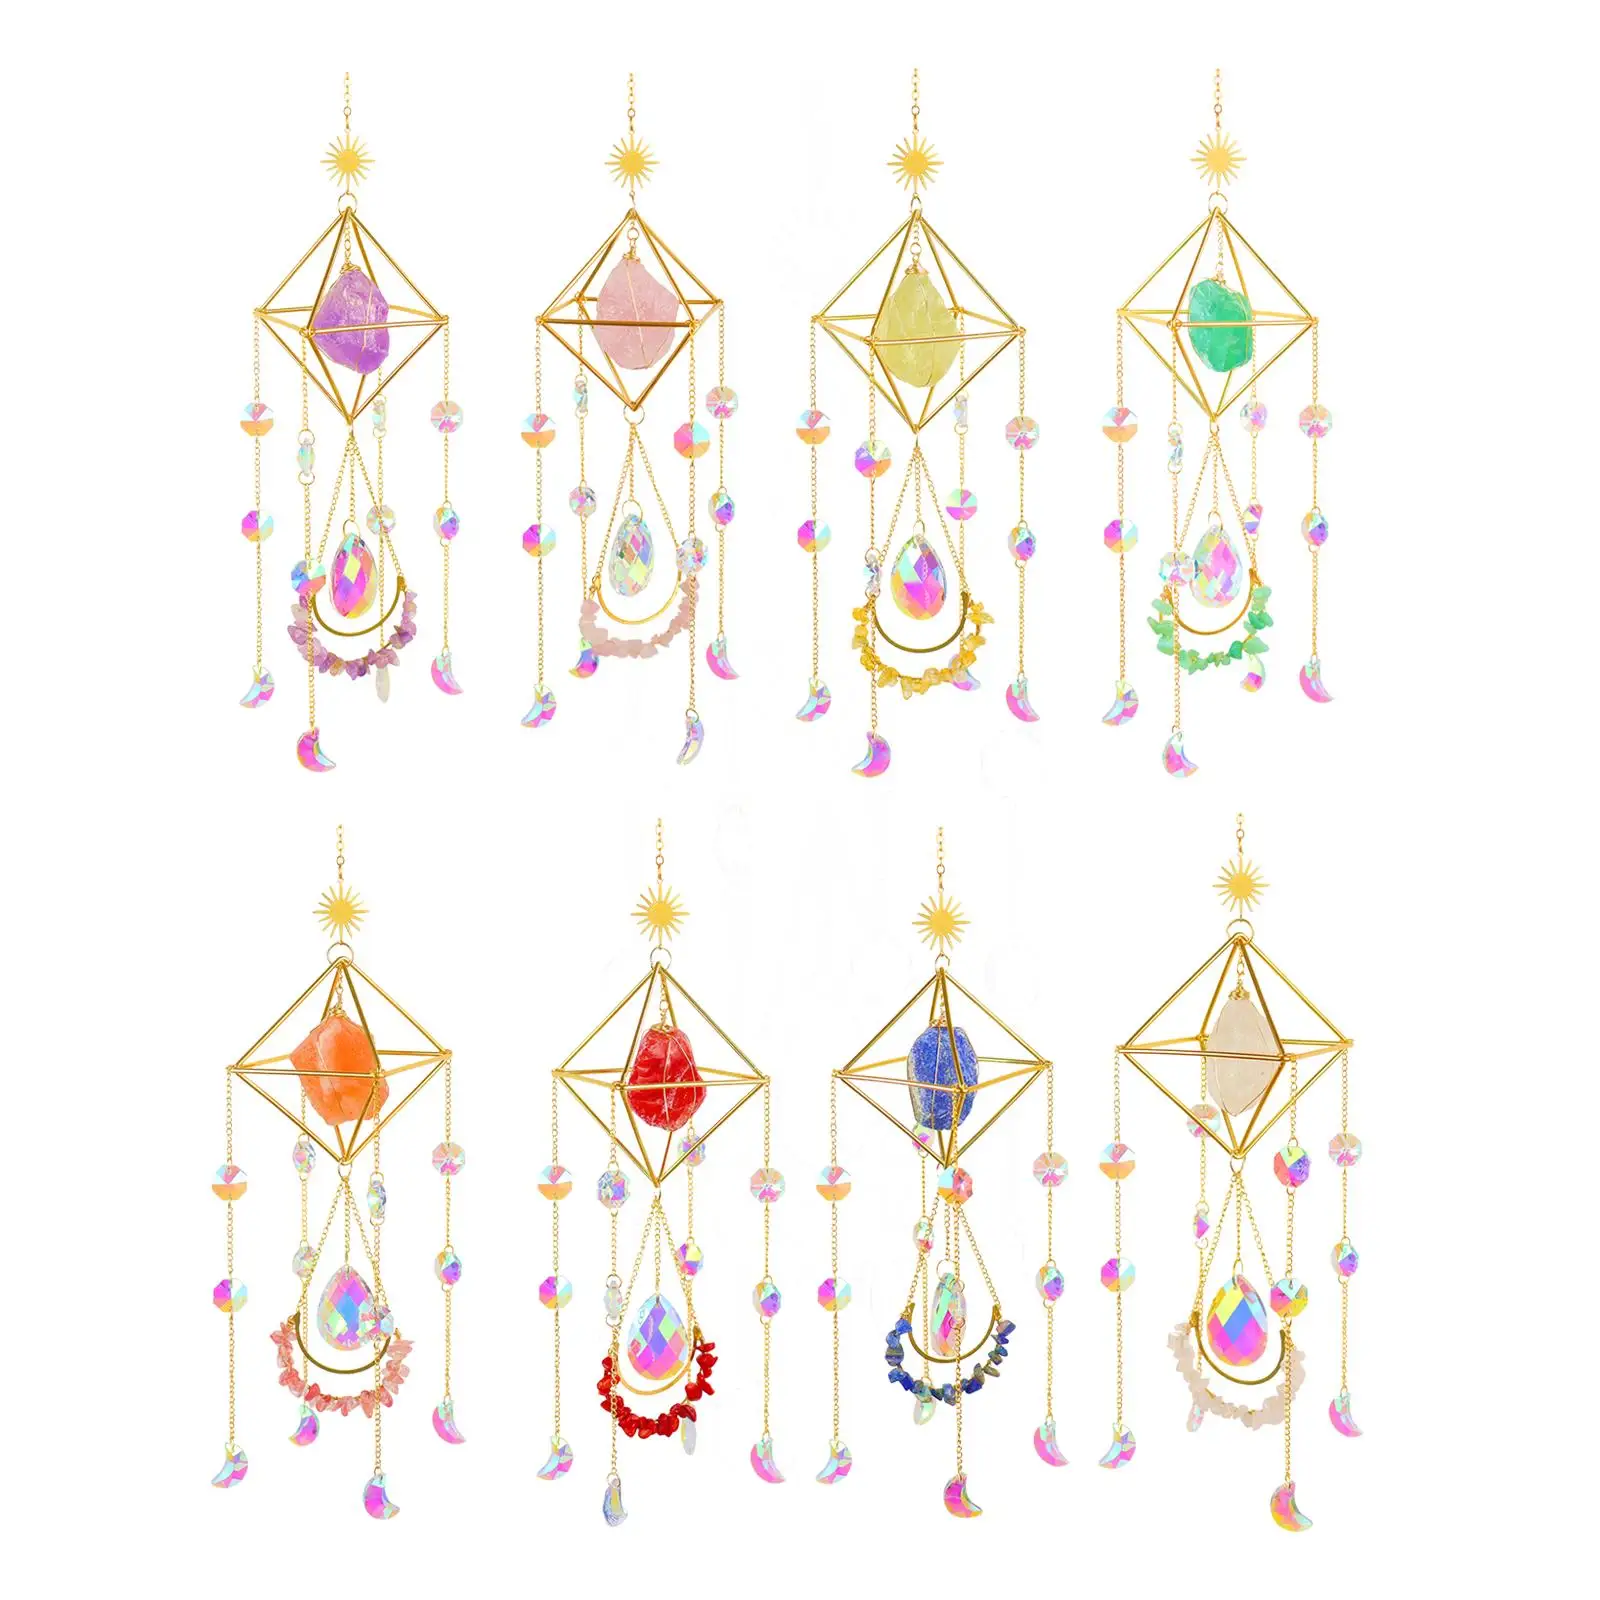 Crystal Wind Chimes Pendant Window Rainbow Maker Prism Ball Balcony Outdoor